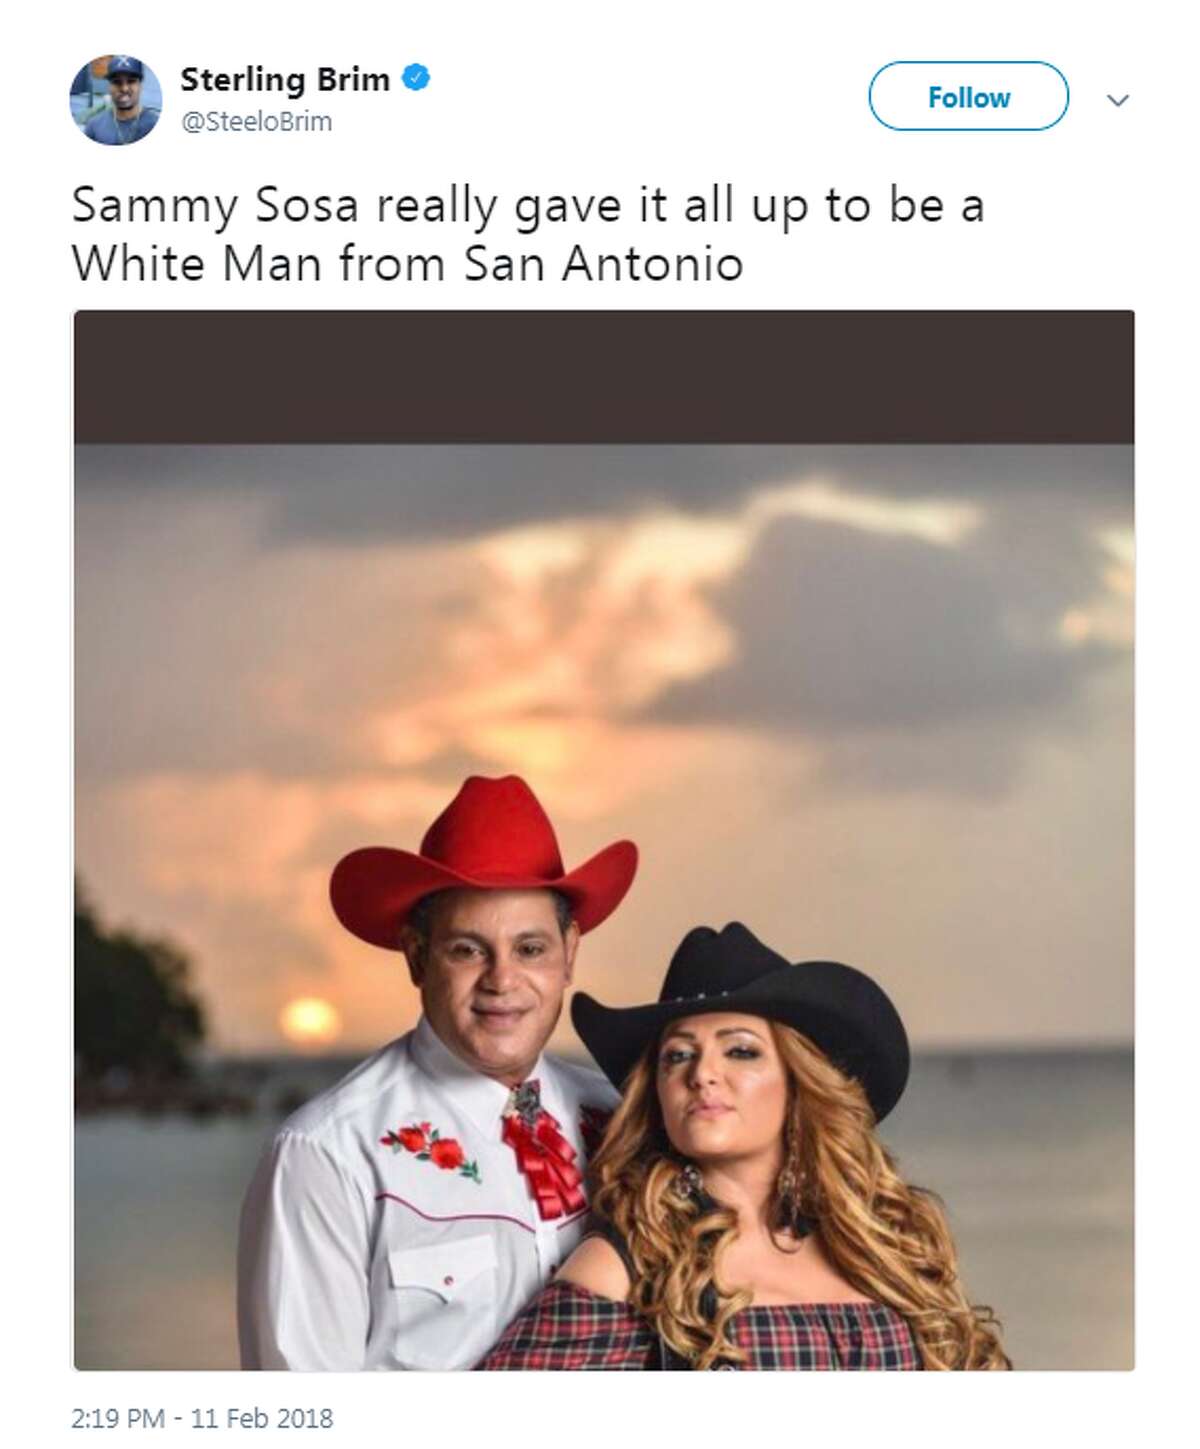 "Sammy Sosa really gave it all up to be White Man from San Antonio," Sterling Brim, of MTV's Ridiculousness tweeted with a photo of the slugger and his wife dressed in western wear.